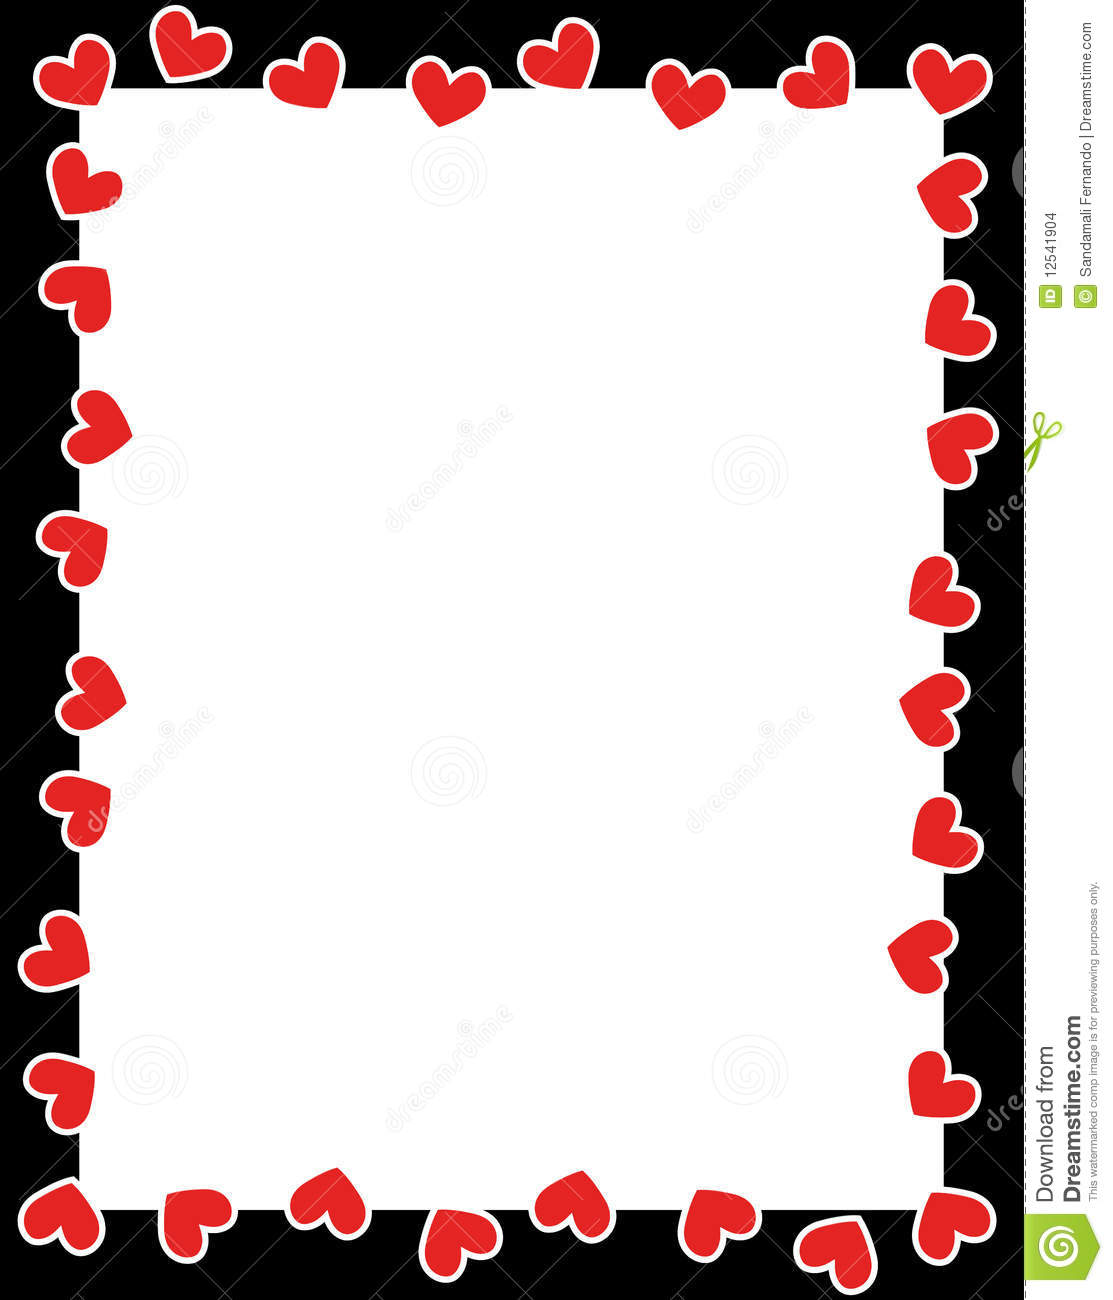 heart-borders-free-download-on-clipartmag